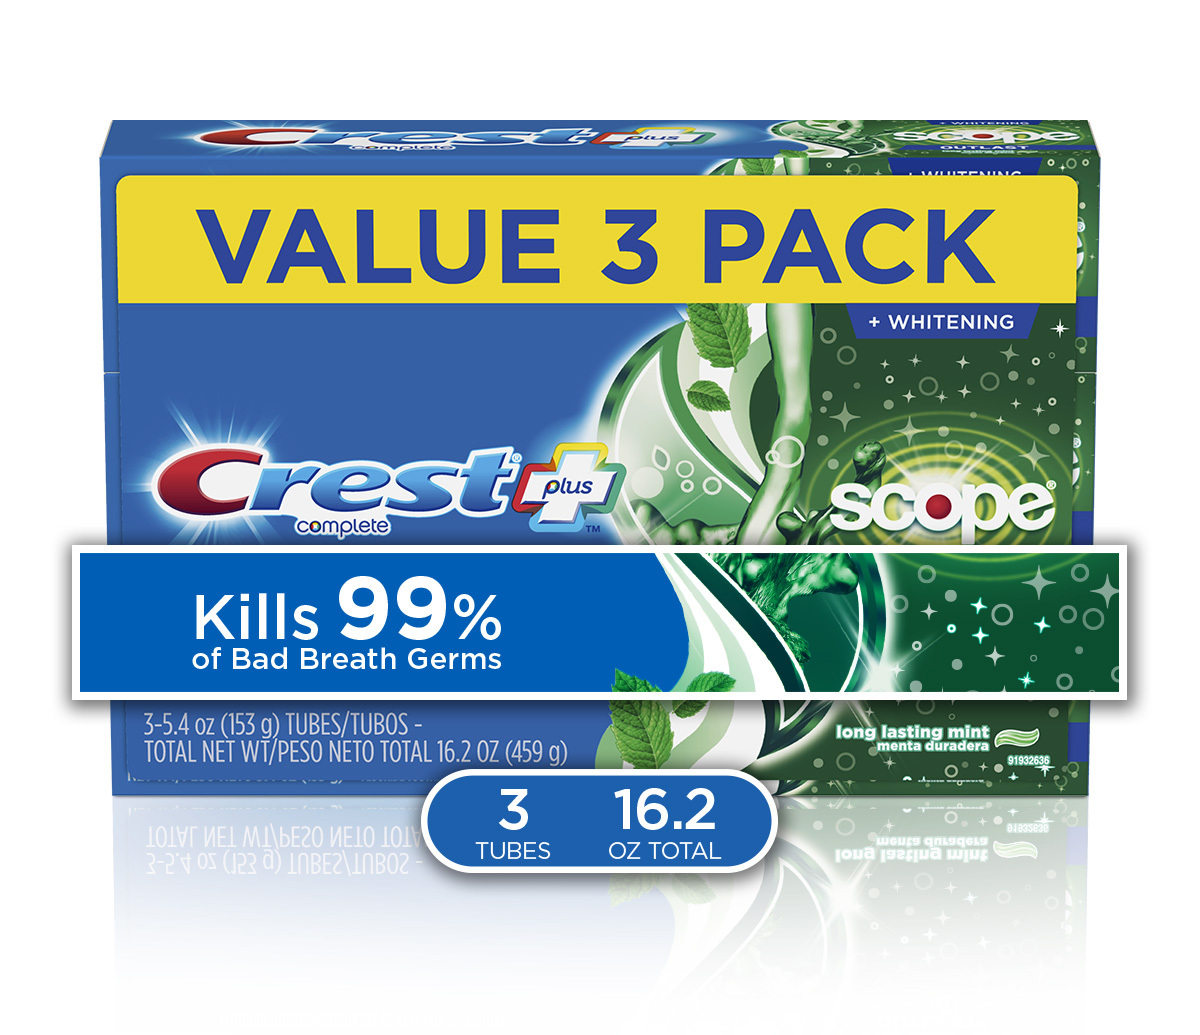 Crest + Scope Outlast Complete Whitening Toothpaste, Mint, 5.4 oz, Pack of 3 - image 1 of 10